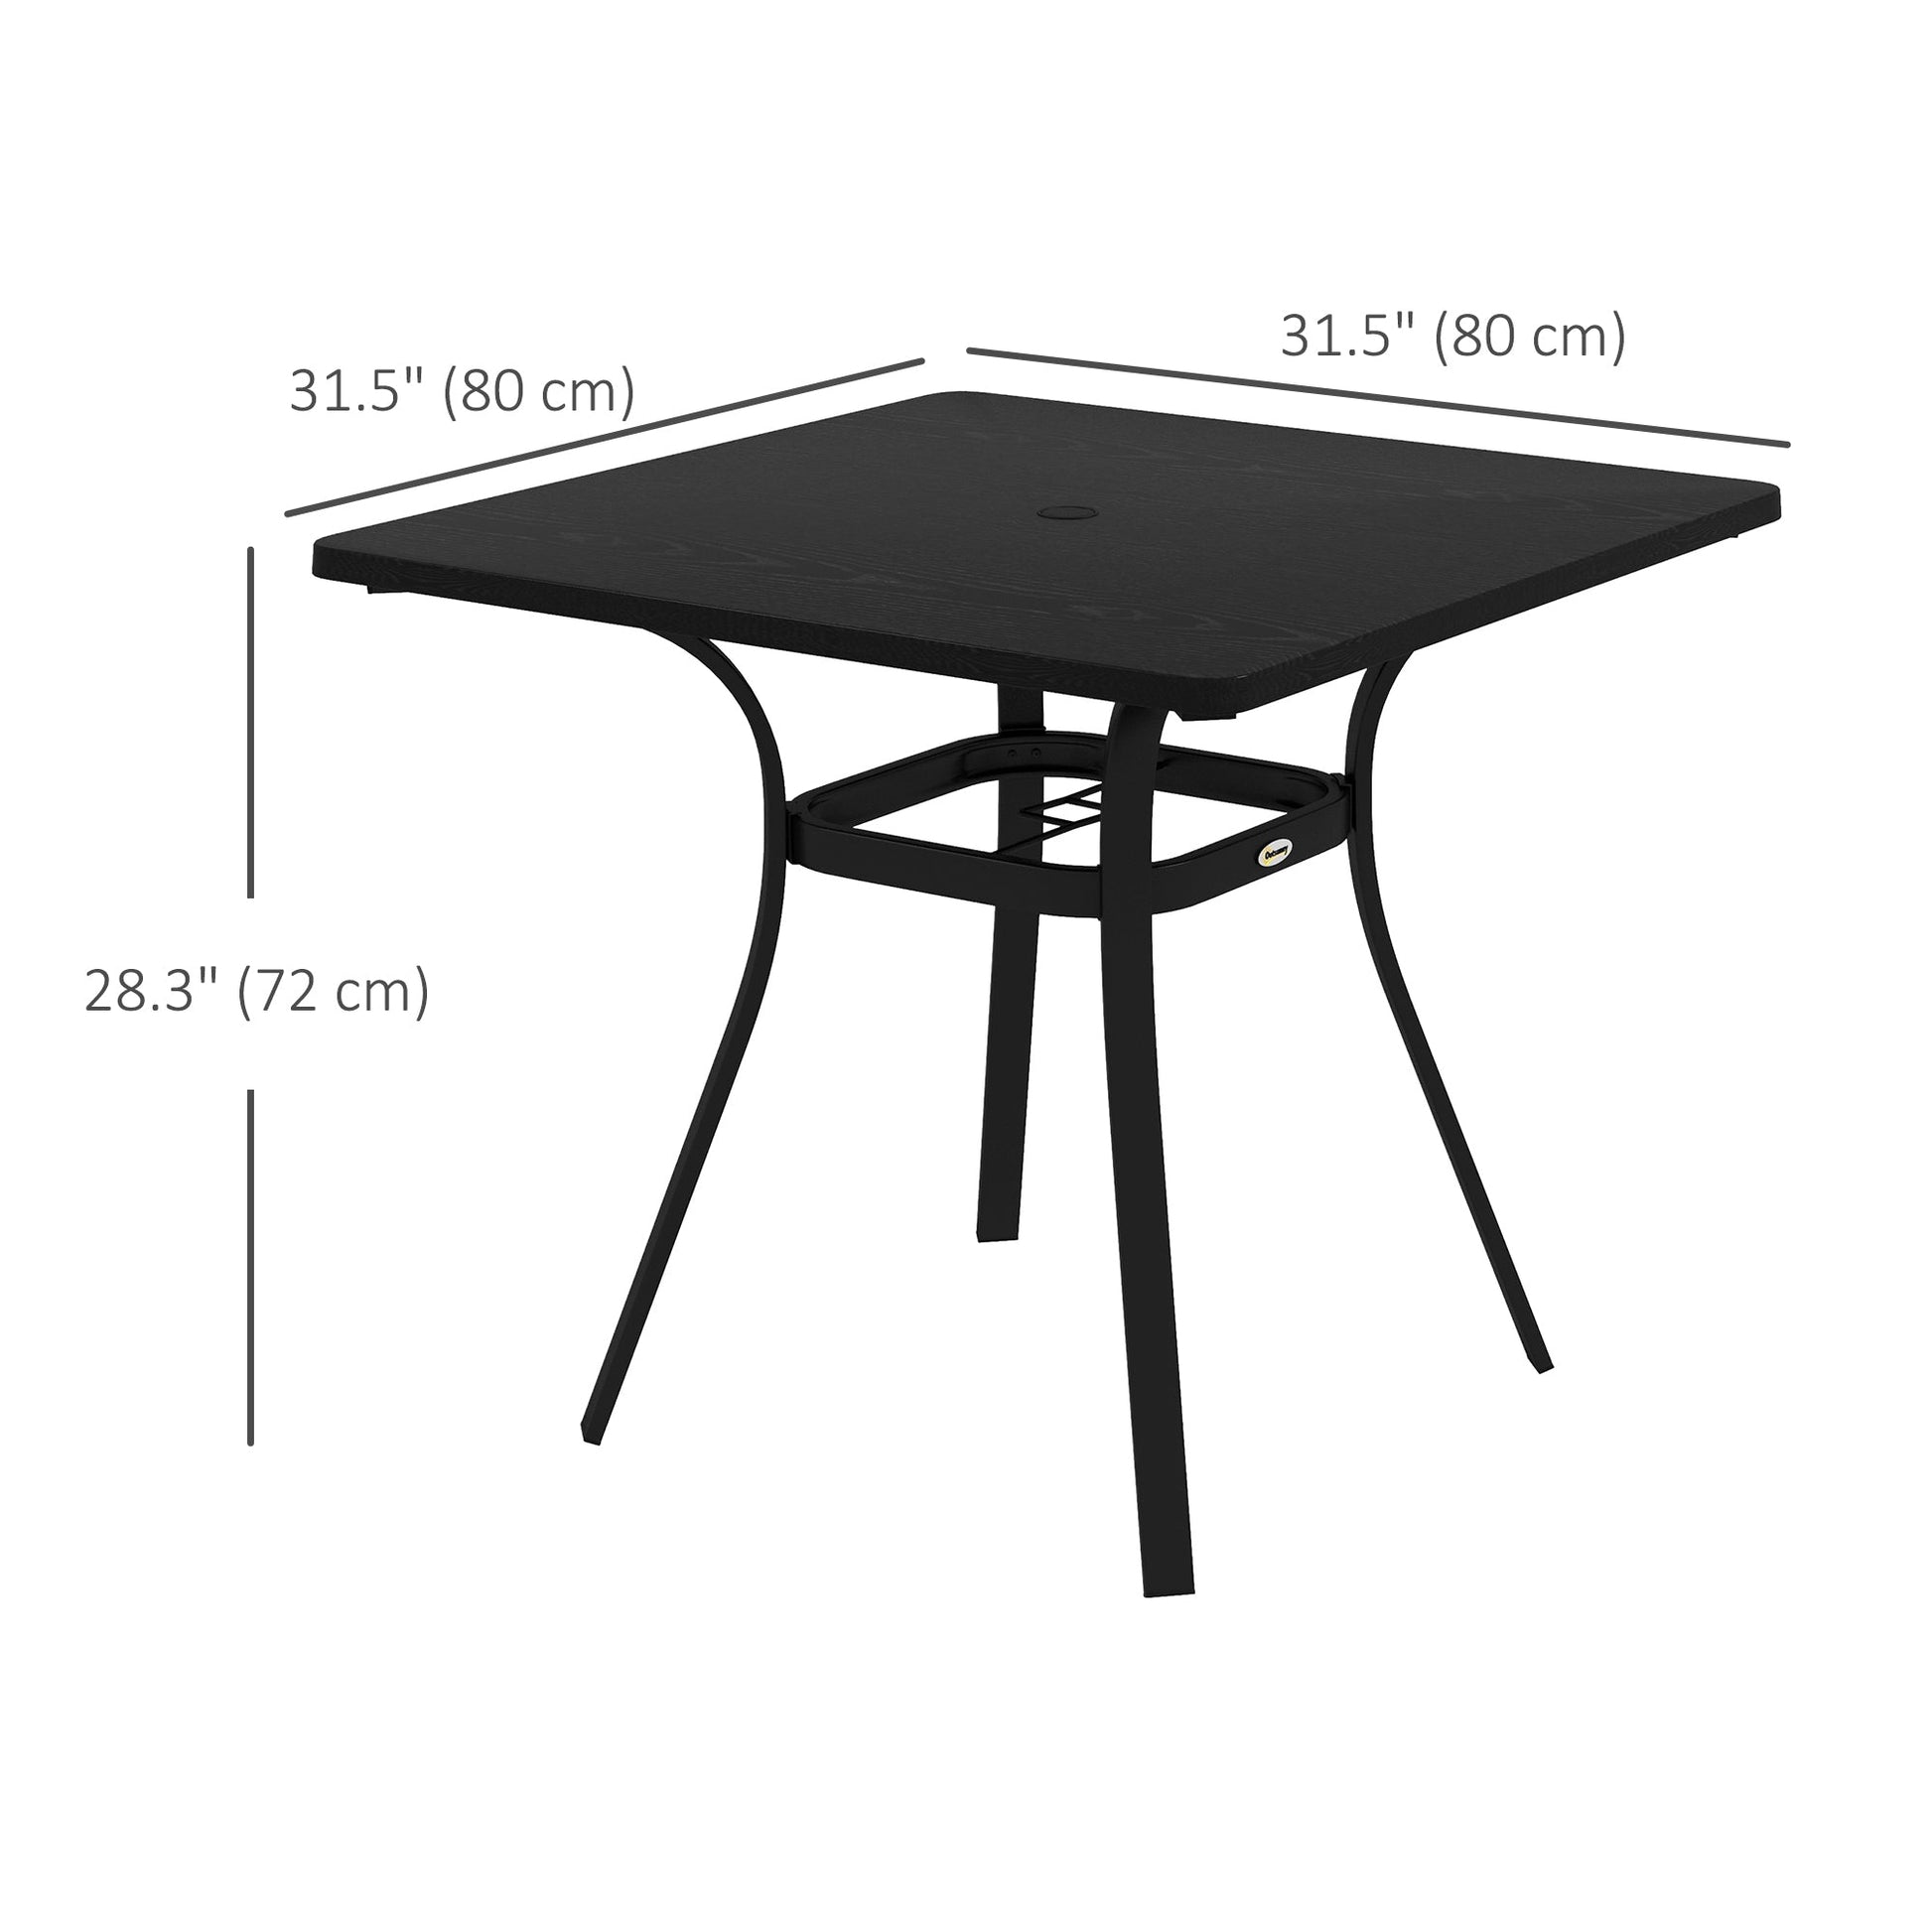 Rectangle Patio Dining Table for 4 People with Steel Legs, Metal Tabletop for Garden, Backyard, Lawn, Balcony, Black at Gallery Canada